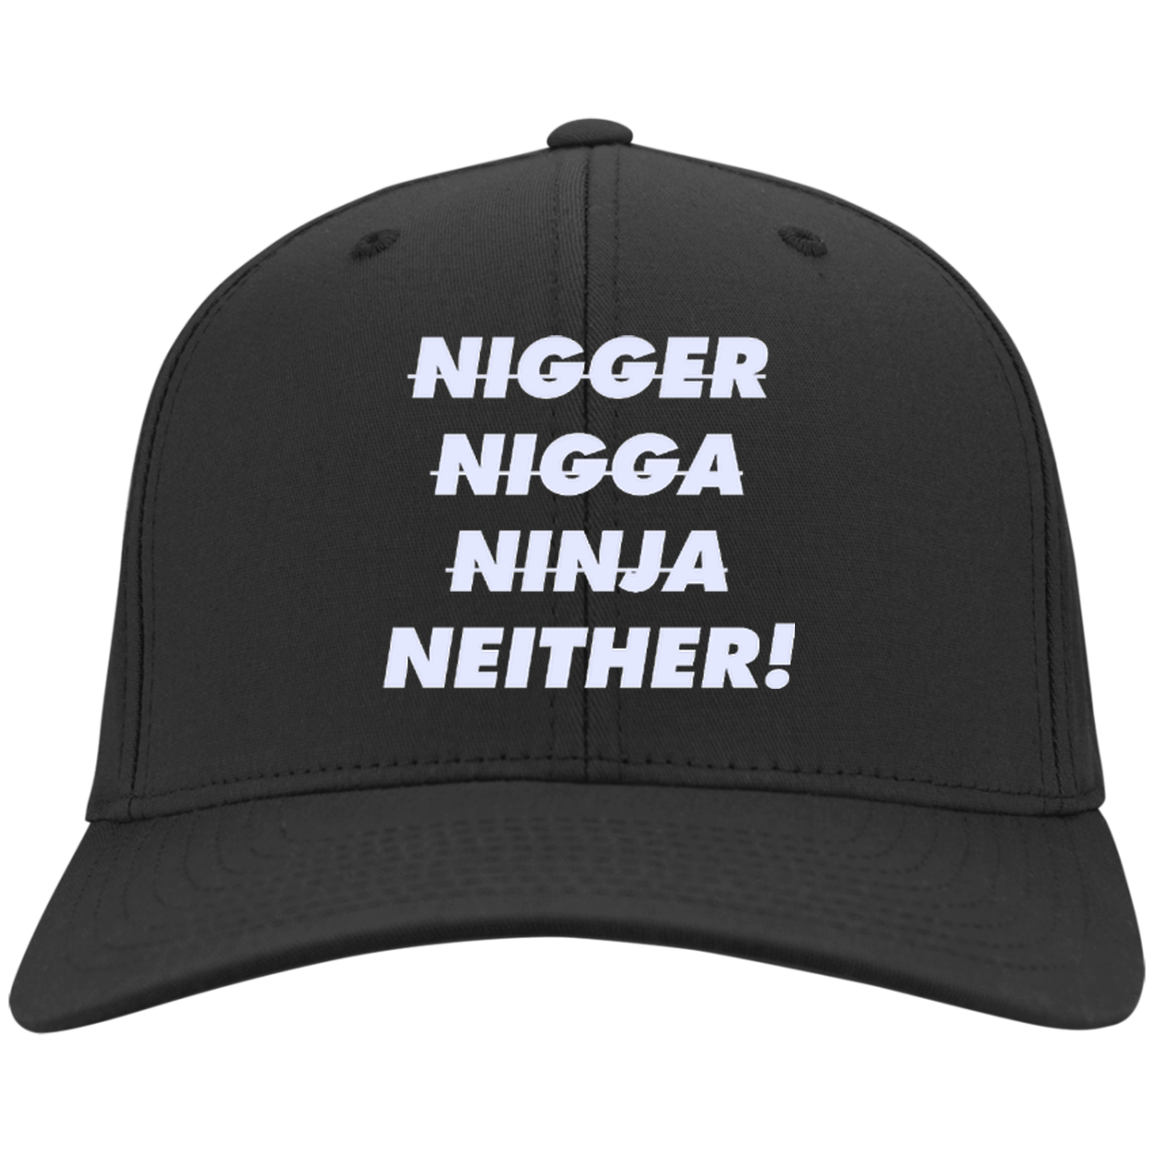 I'm Neither Hat